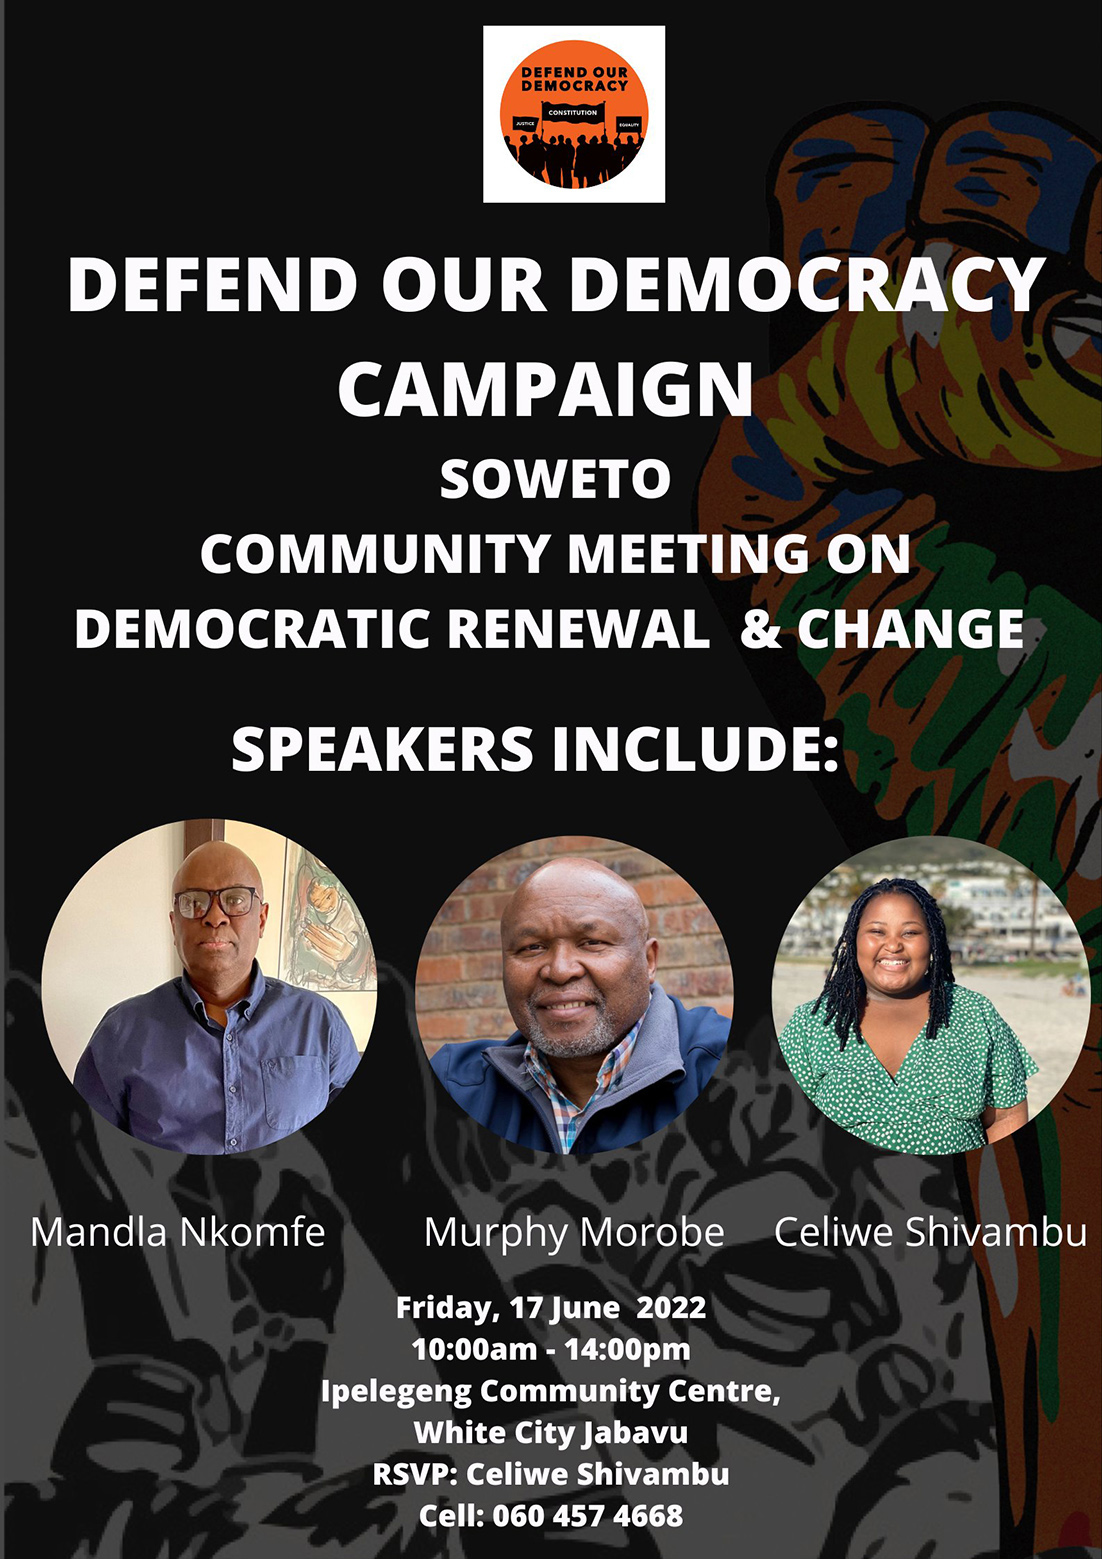 A poster advertising the Defend Our Democracy Campaign event in Soweto